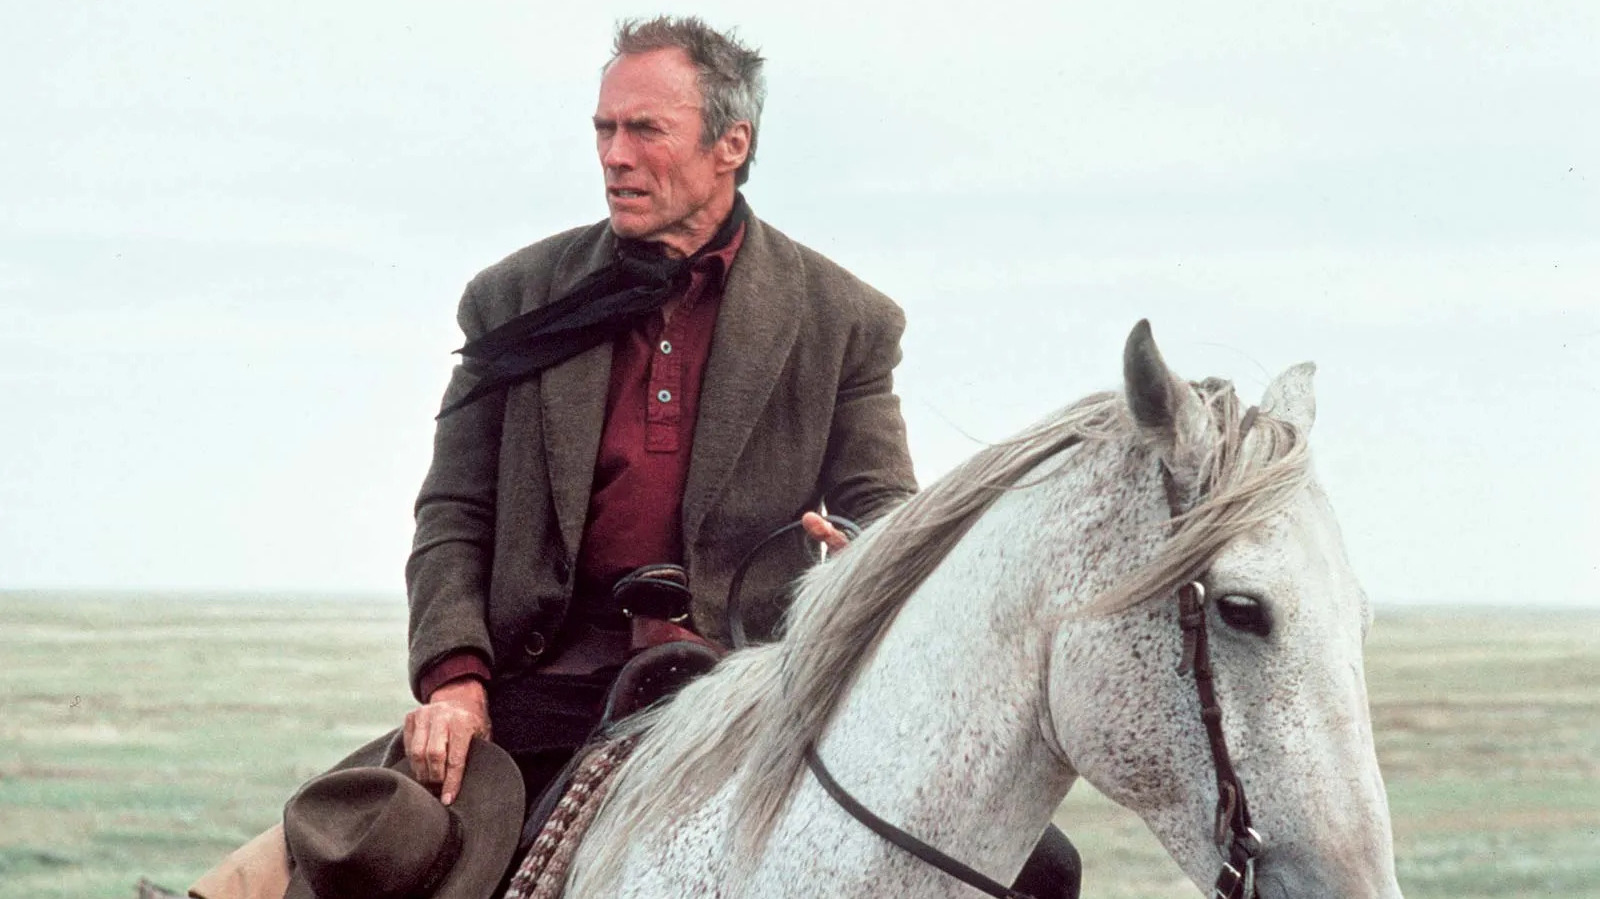 Clint Eastwood's Unforgivable Character Originally Asked For Much More Prosthetic Work